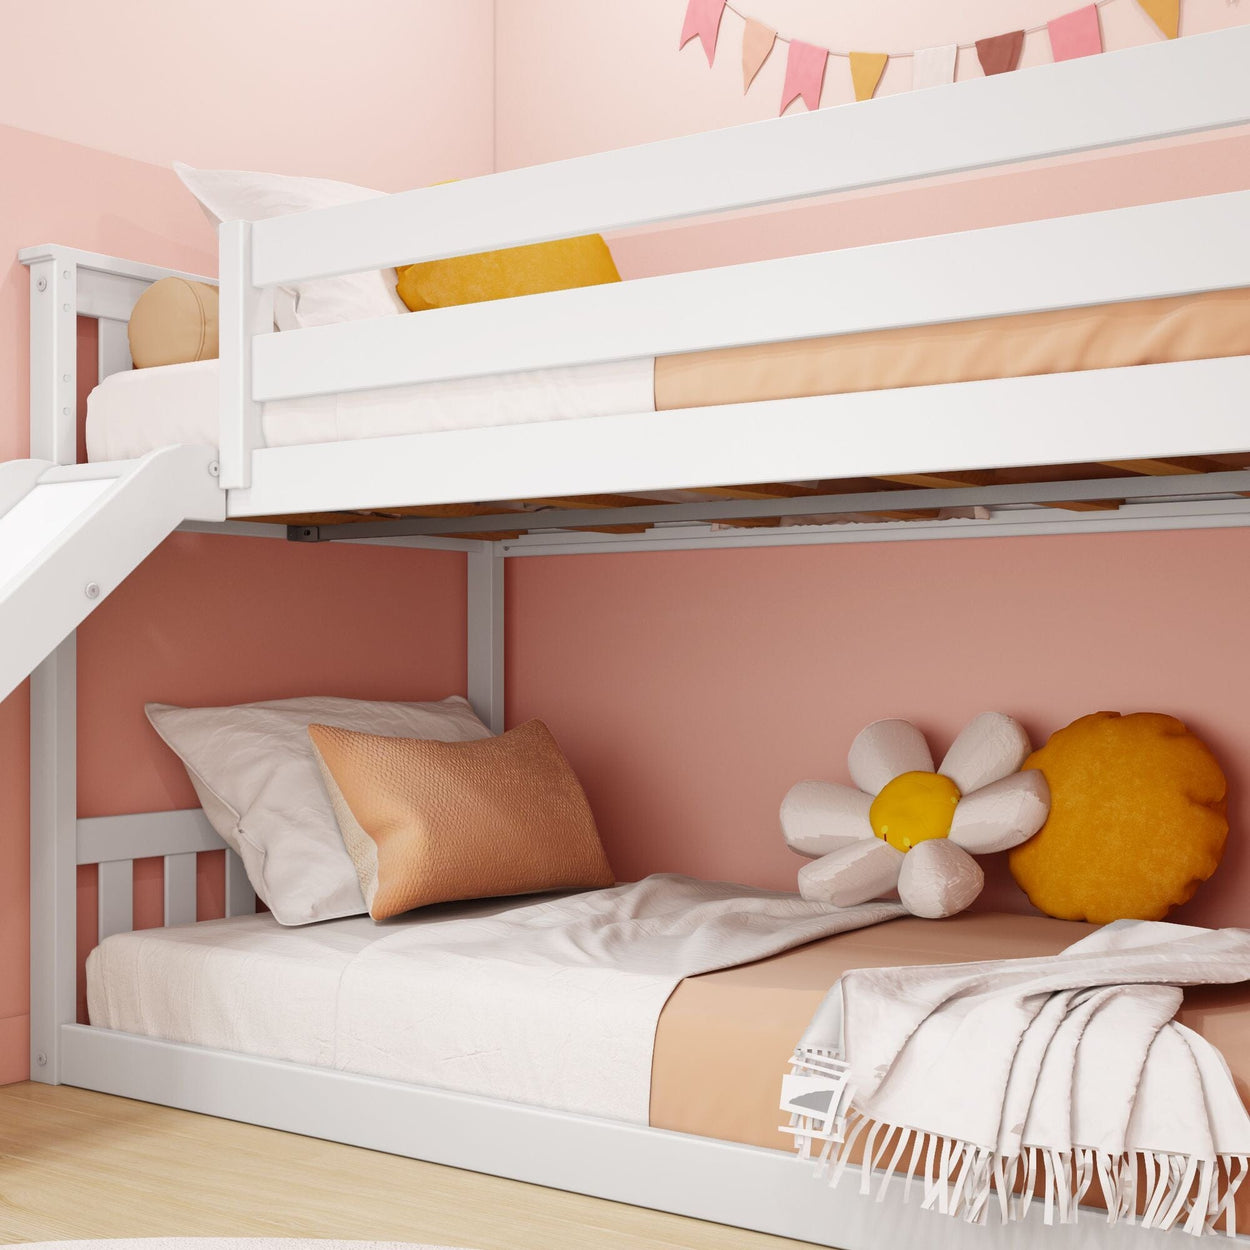 185321-002 : Bunk Beds Twin over Twin Low Bunk Bed with Ladder on End and Slide, White